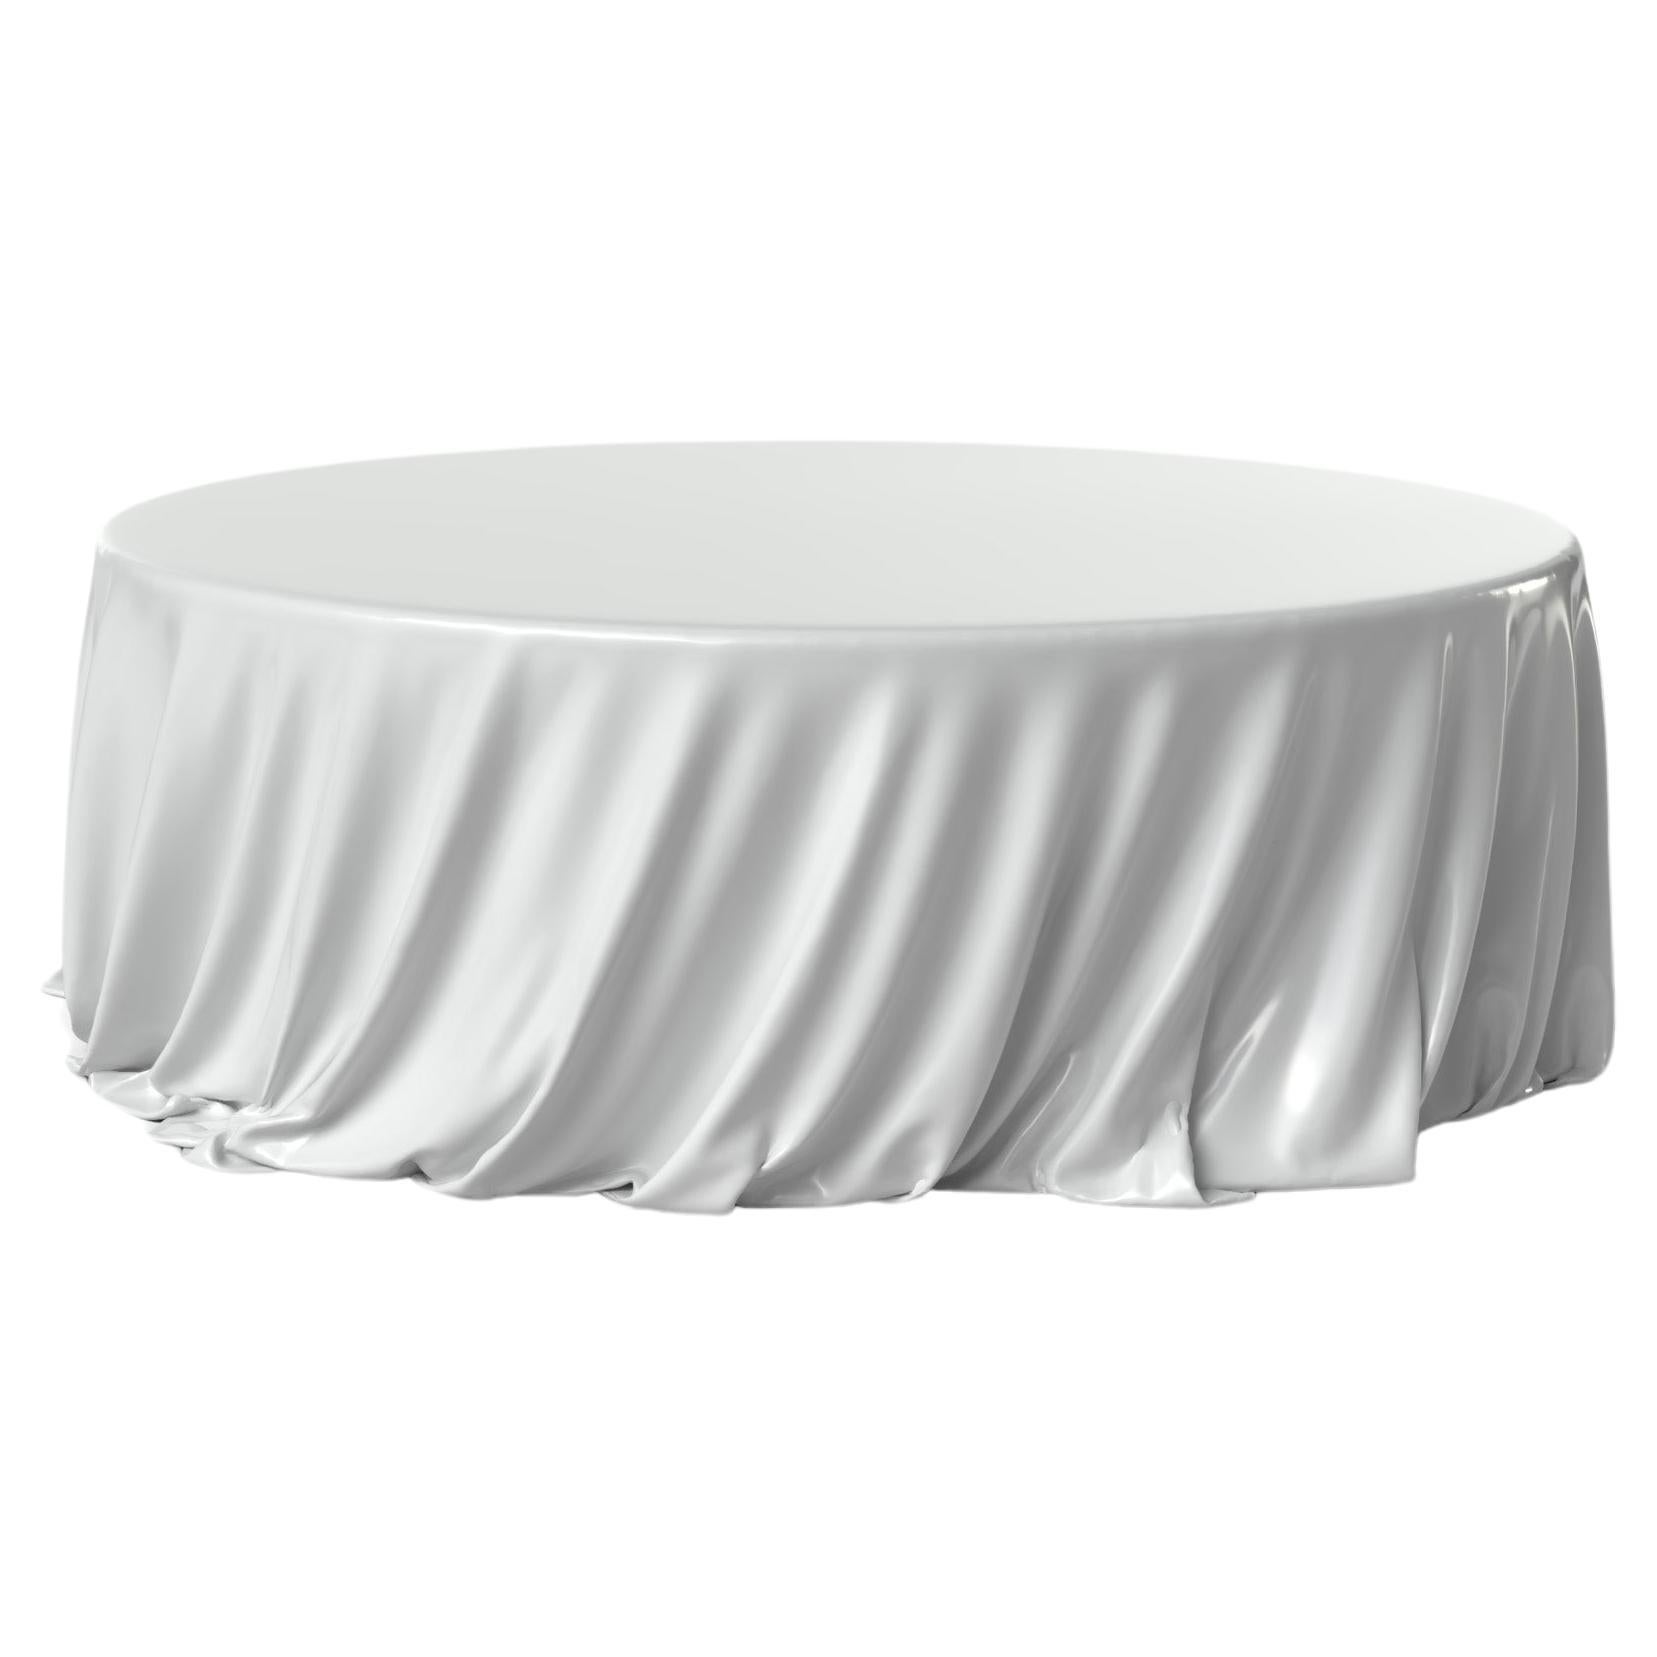 Levitaz Round Coffee Table in White Gloss For Sale